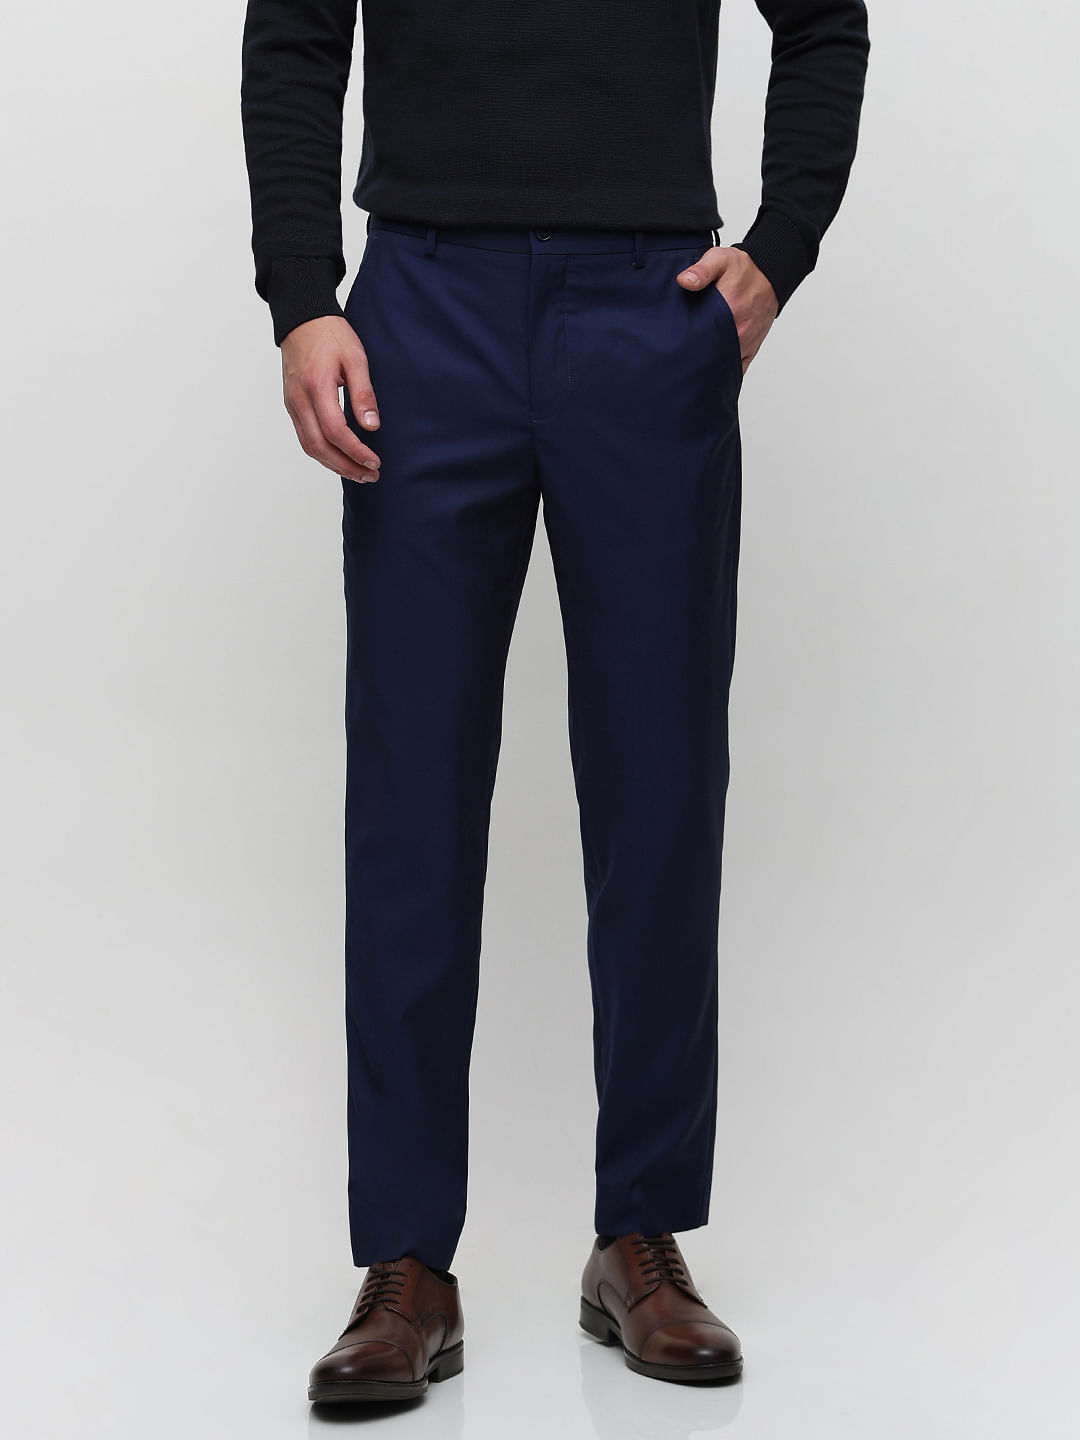 Navy Lightweight Stretch Pants | The Suit Lady